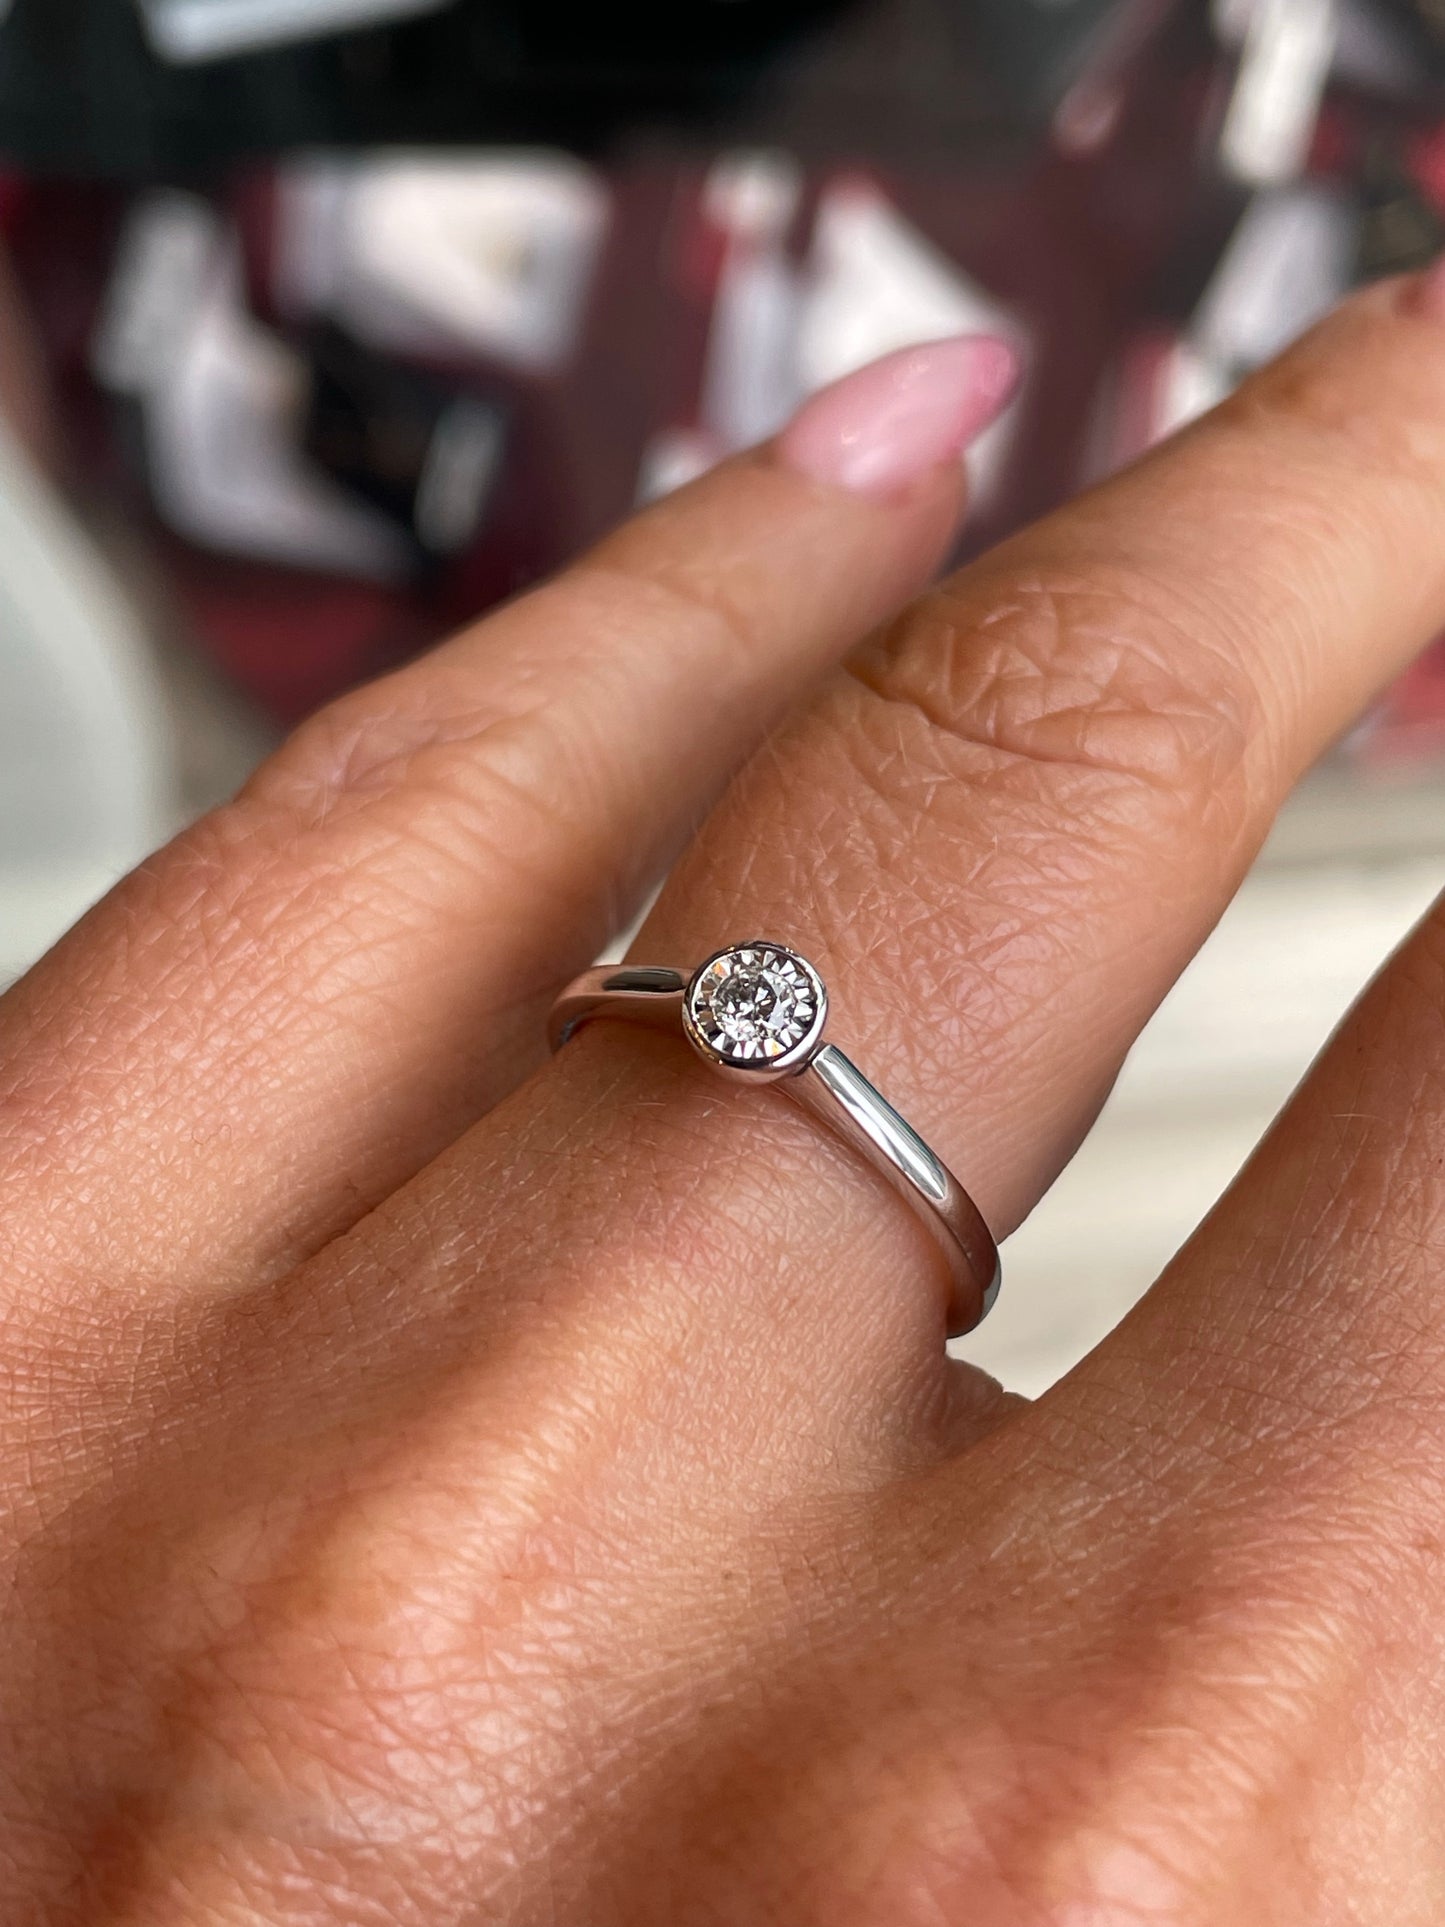 9ct White Gold Diamond Solitaire Engagement Ring | 0.09ct - John Ross Jewellers